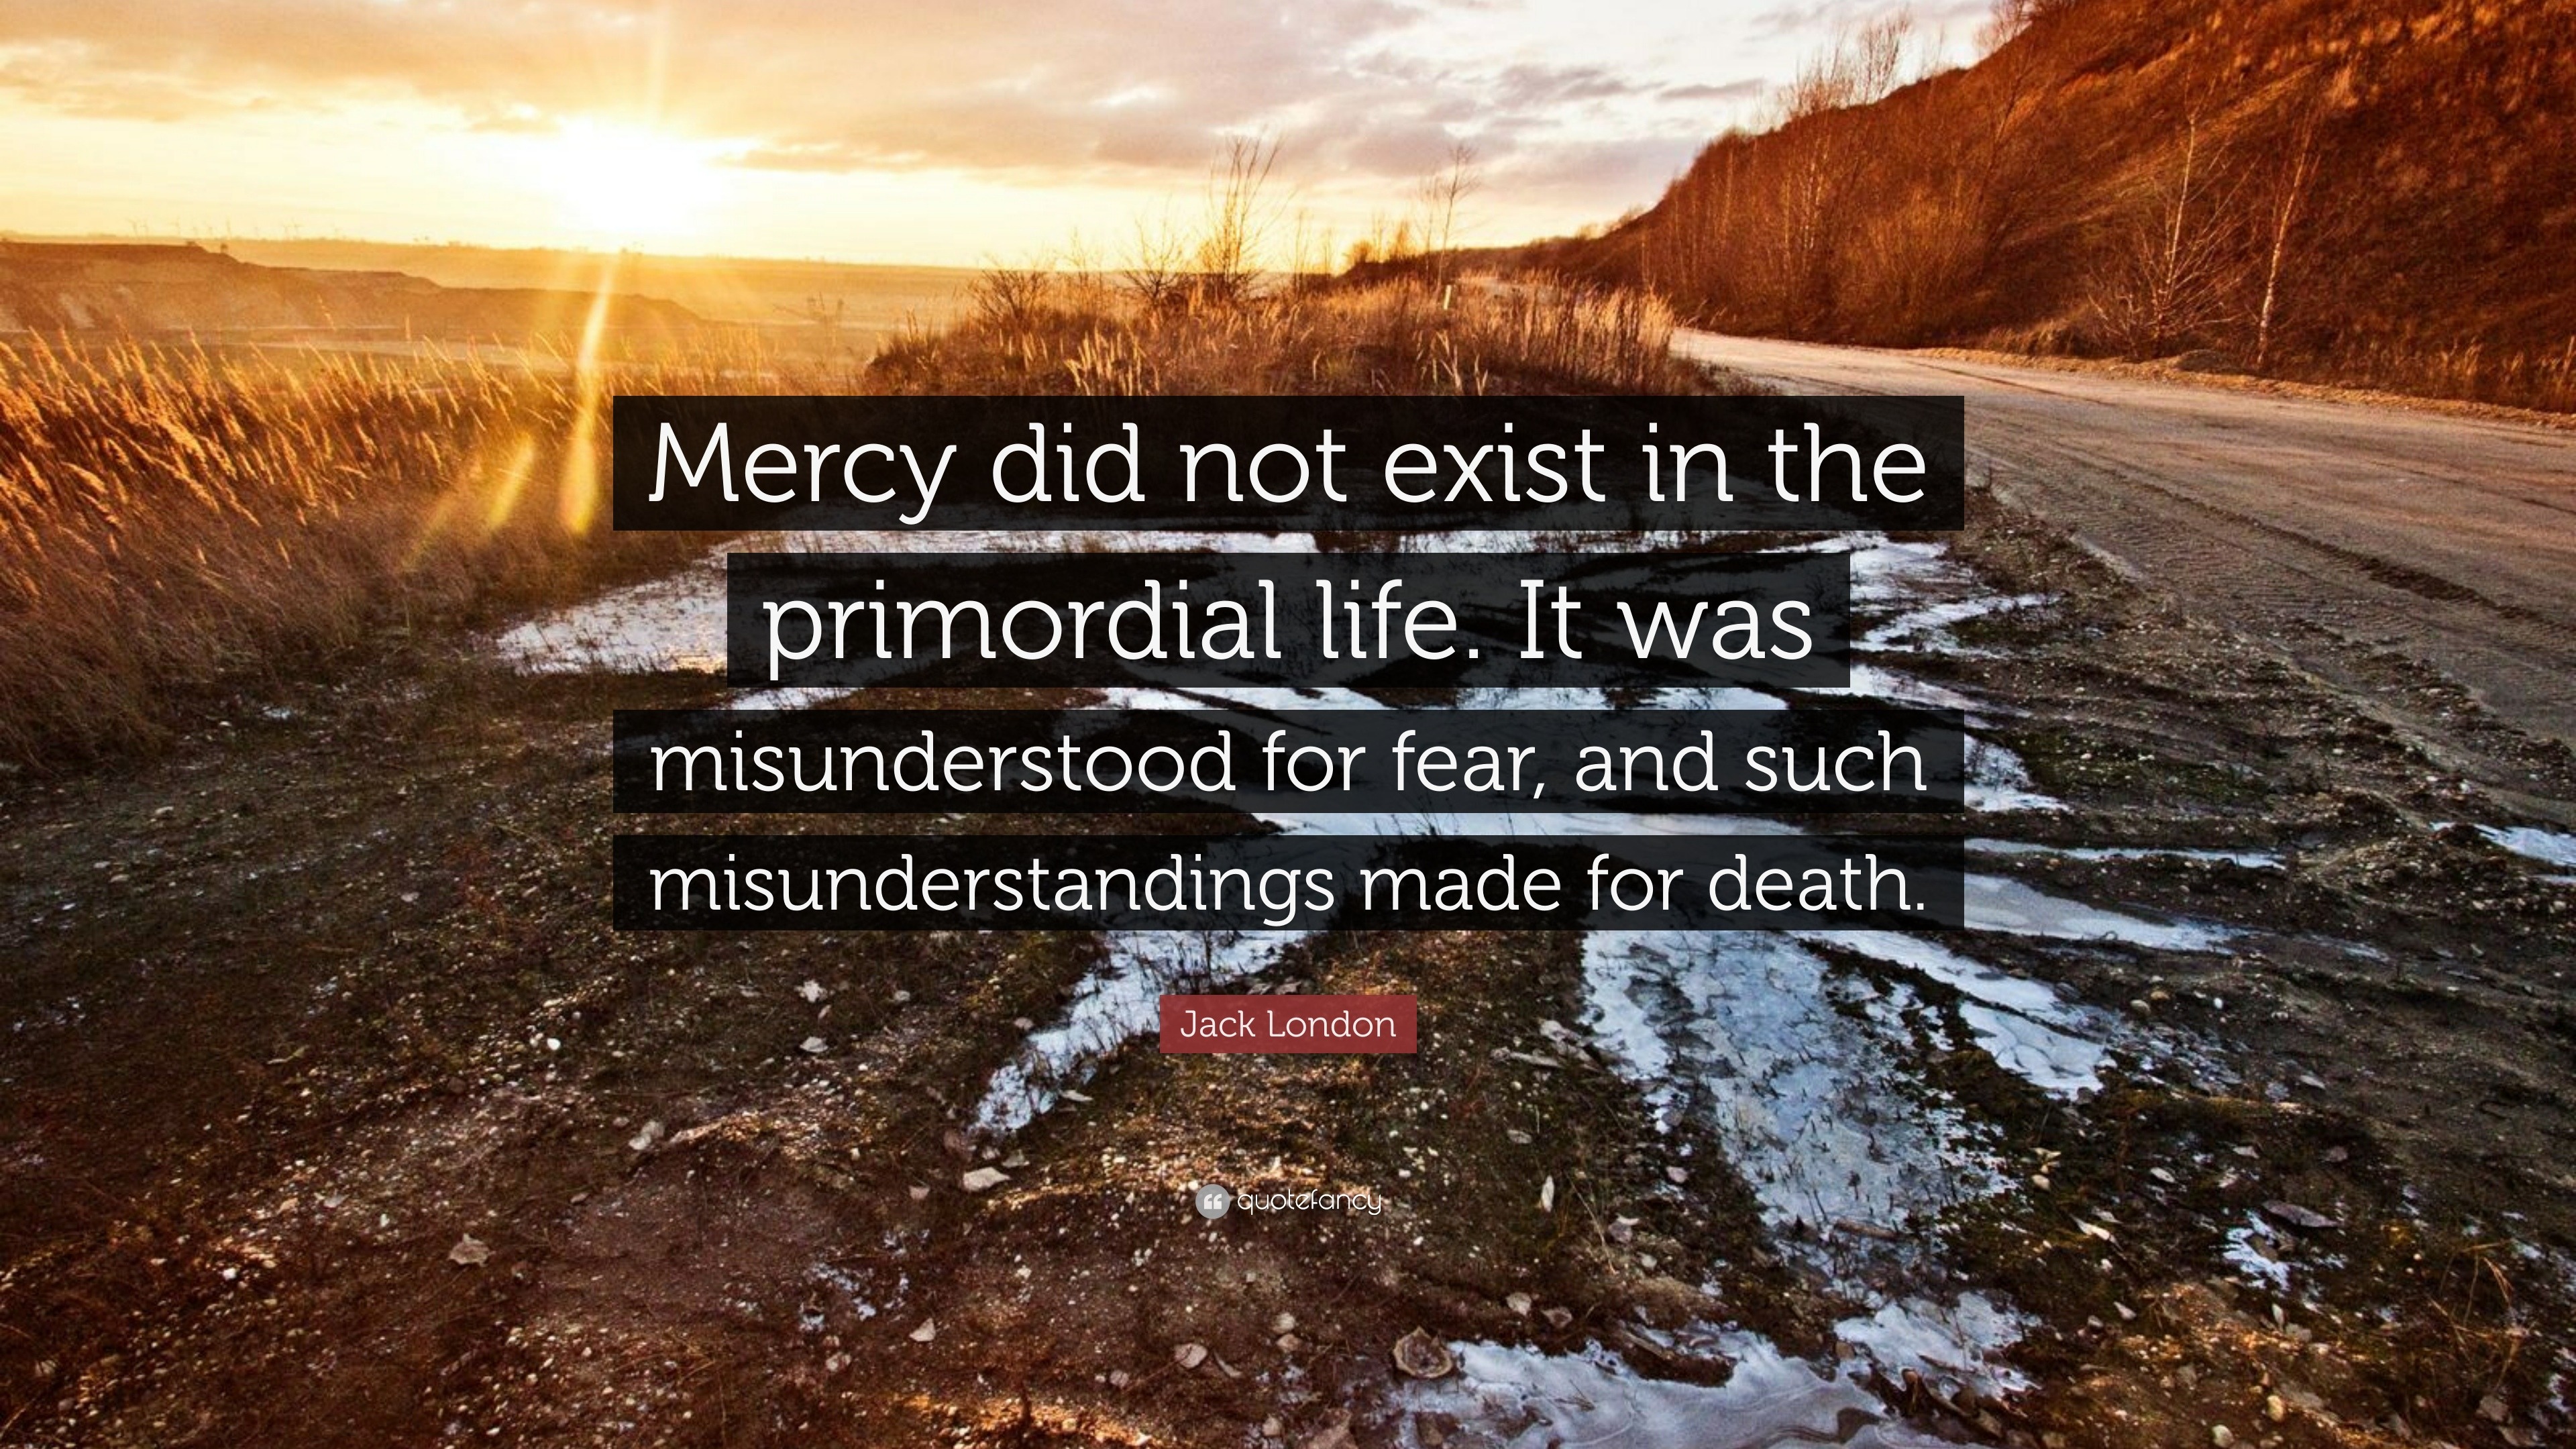 Jack London Quote “Mercy did not exist in the primordial life It was